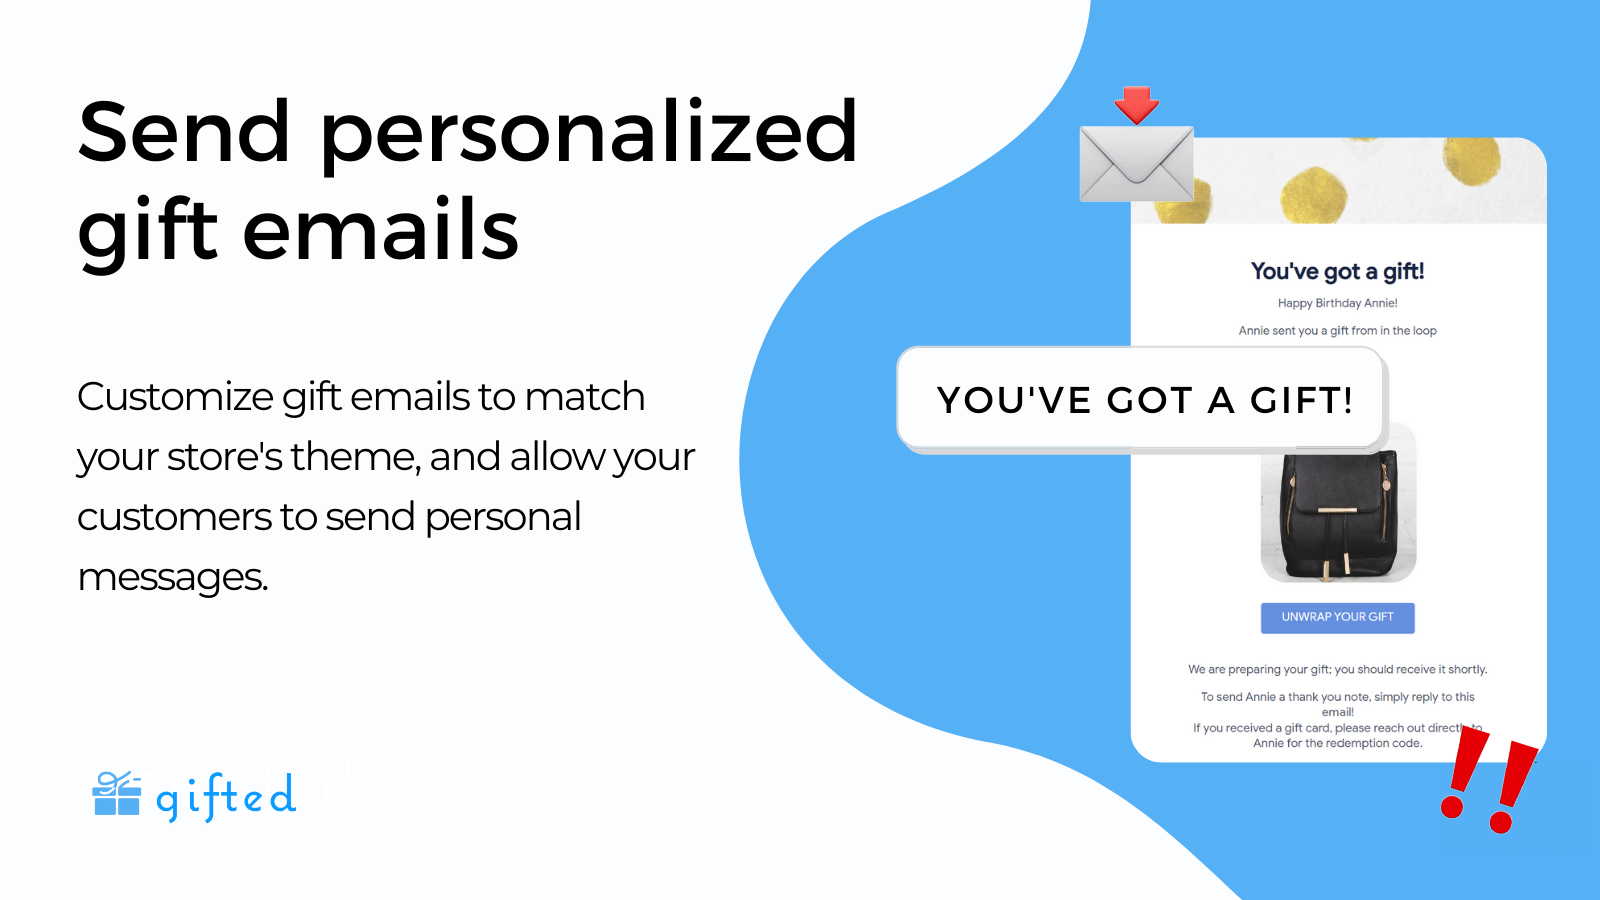 Send personalized gift messages via email